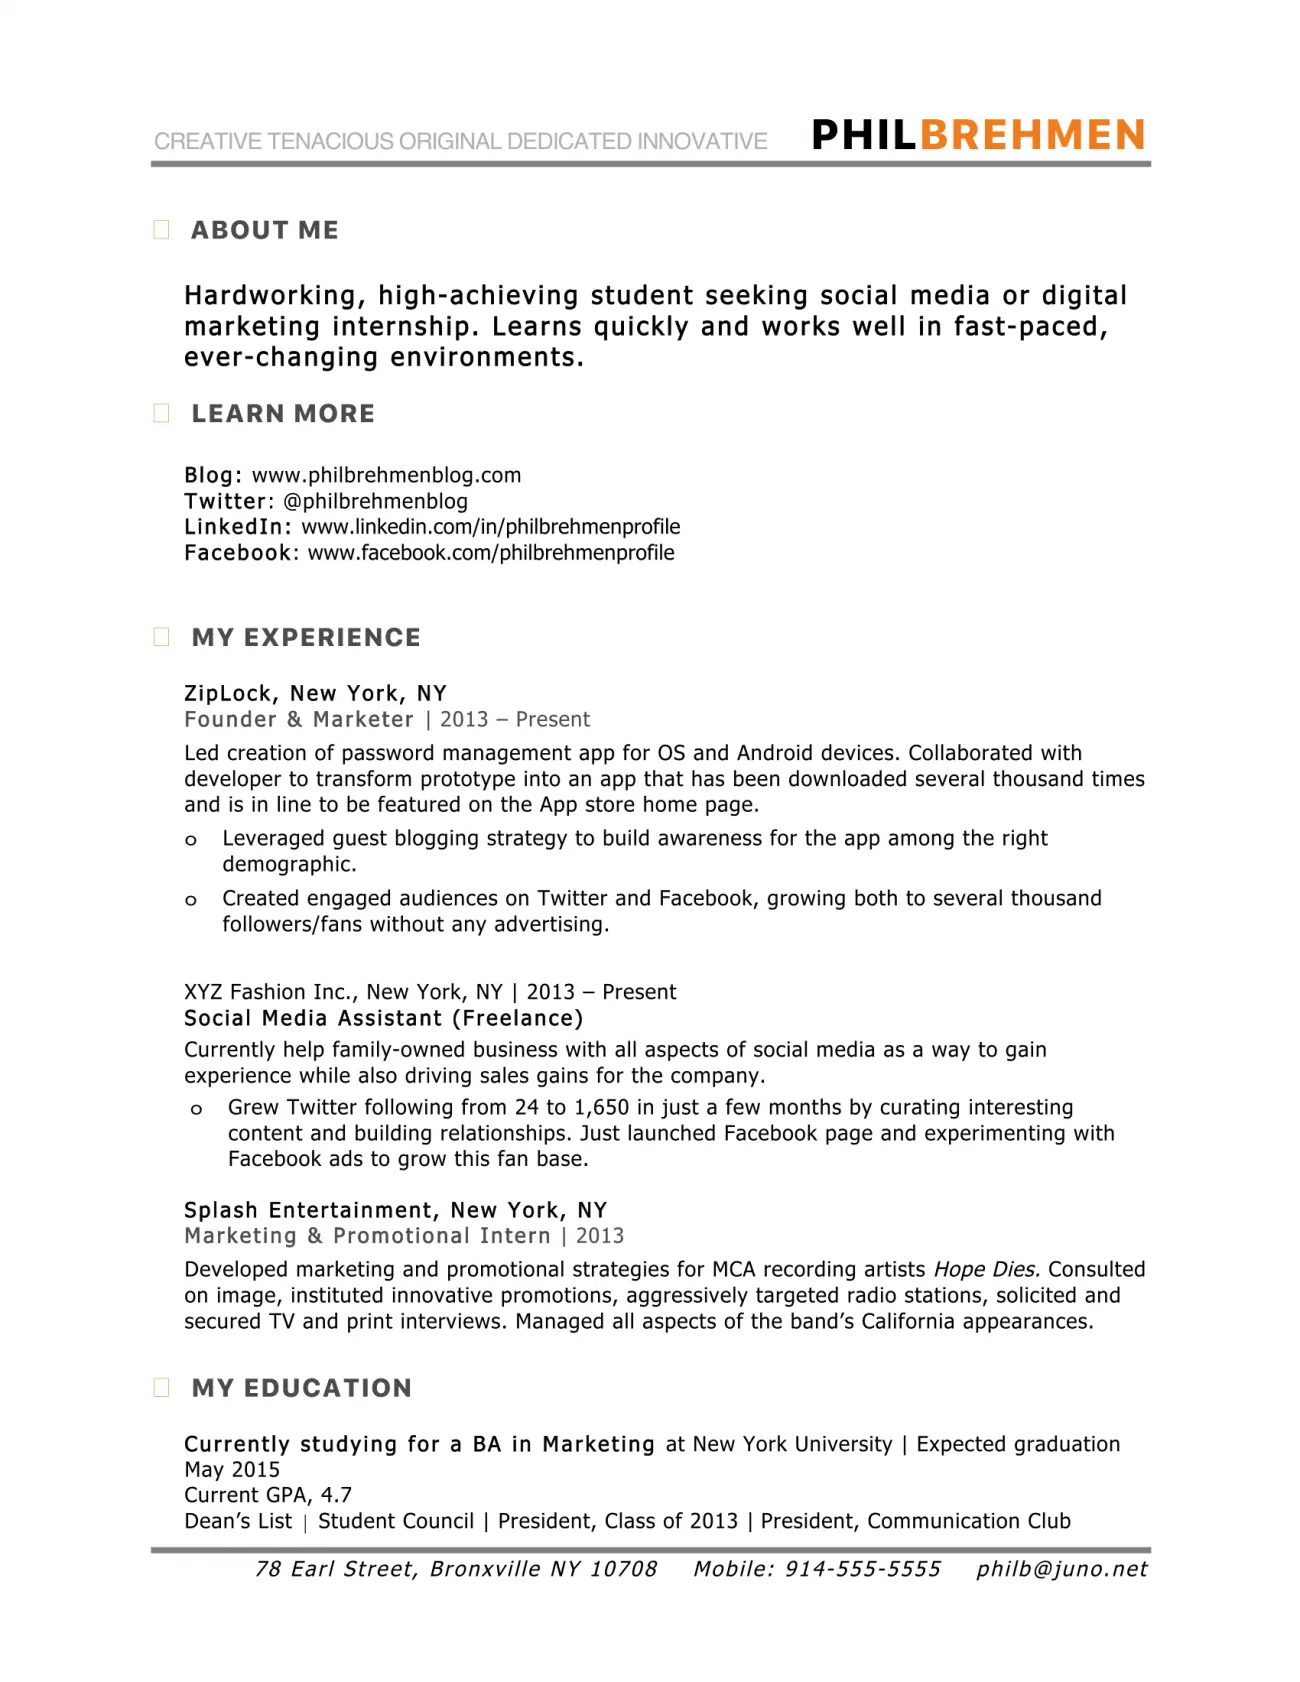 Web application manager resume